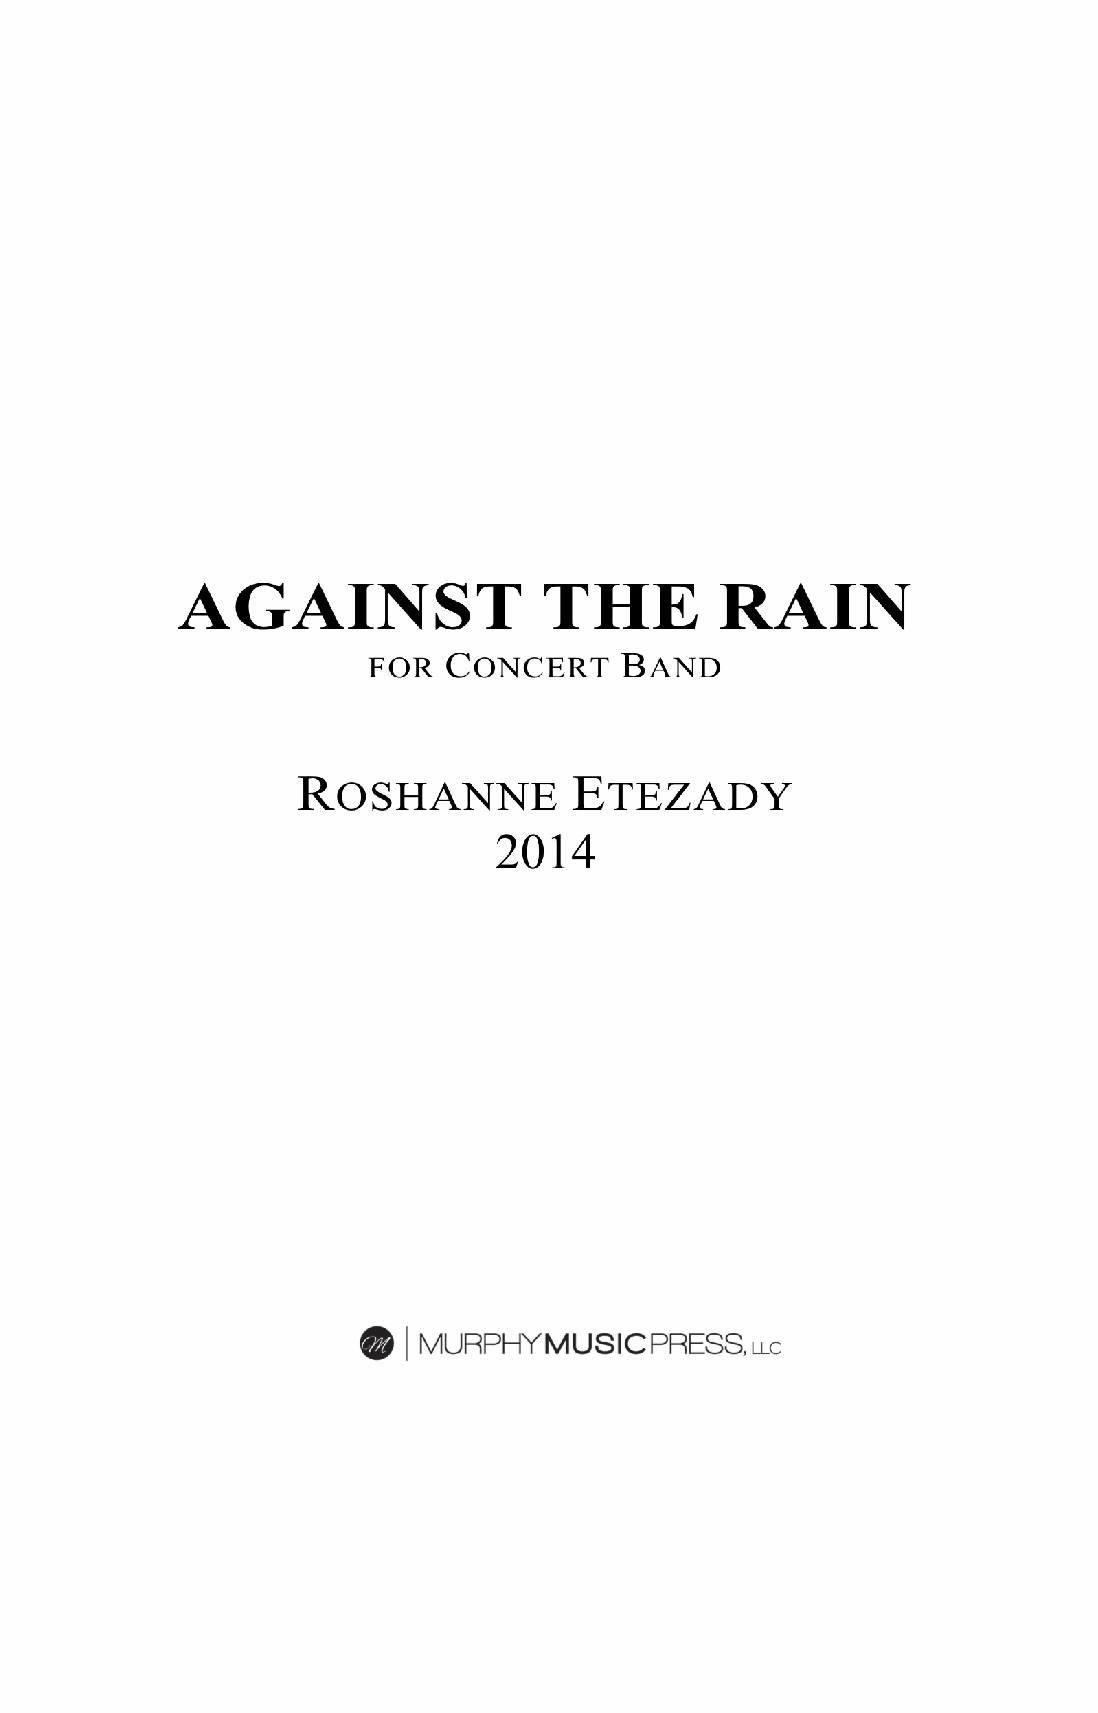 Against The Rain (Score Only) by Roshanne Etezady